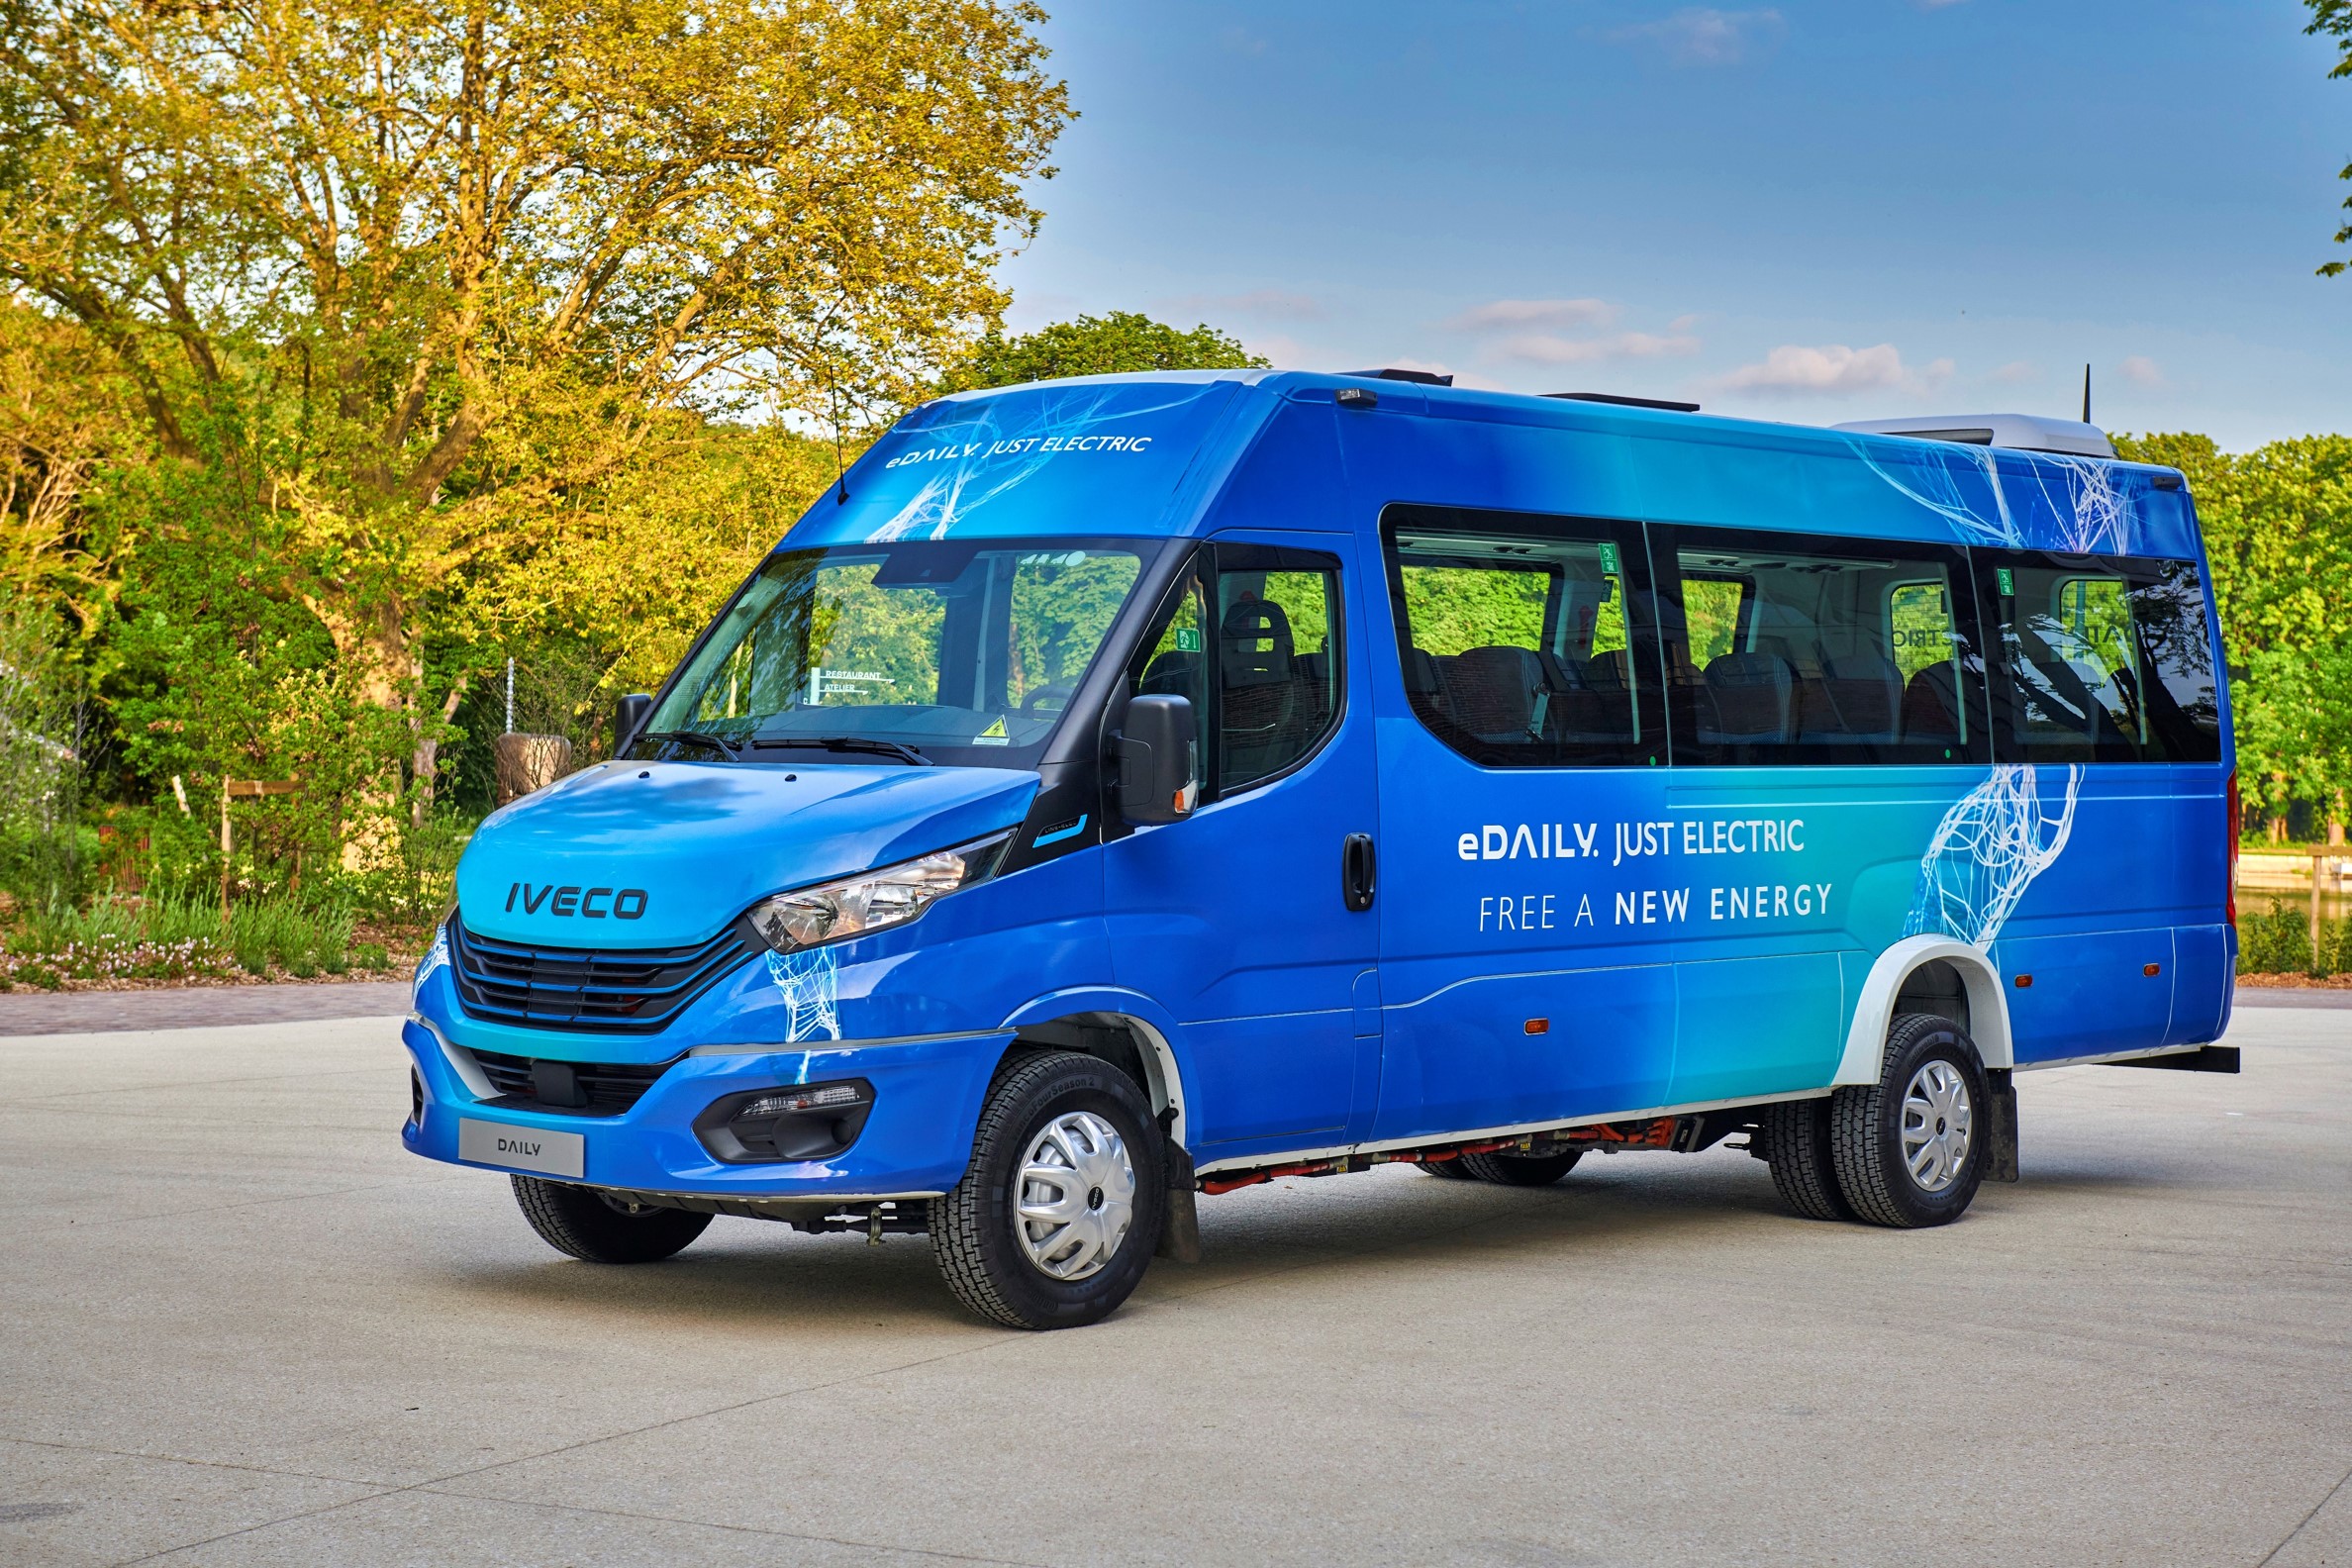 https://www.sustainable-bus.com/wp-content/uploads/2023/05/IVECO-BUS-eDAILY-1.jpg